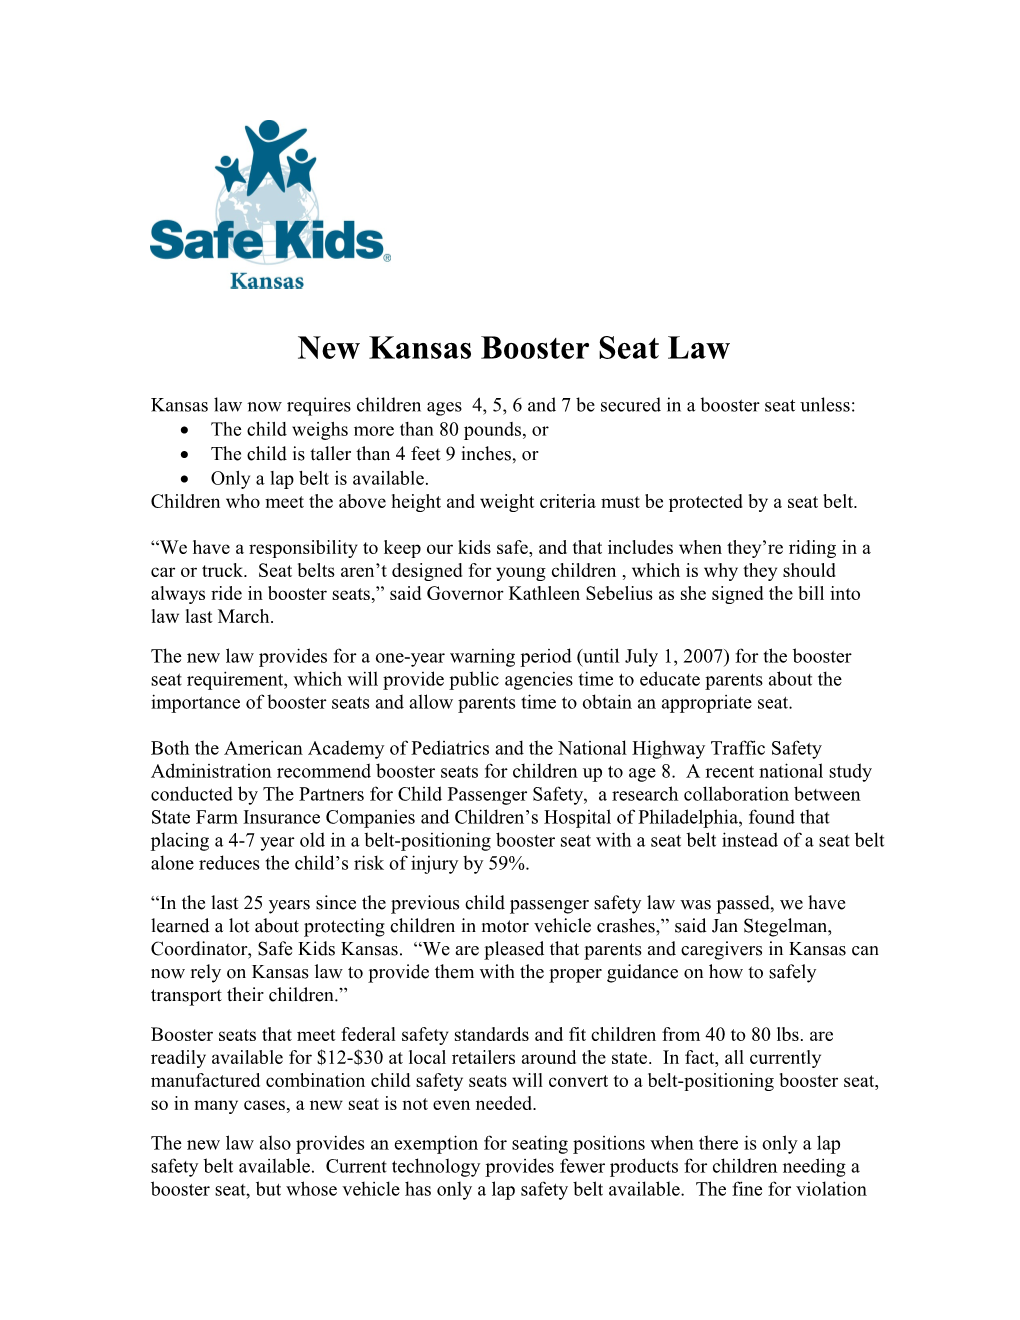 Governor Sebelius Signs Booster Seat Law